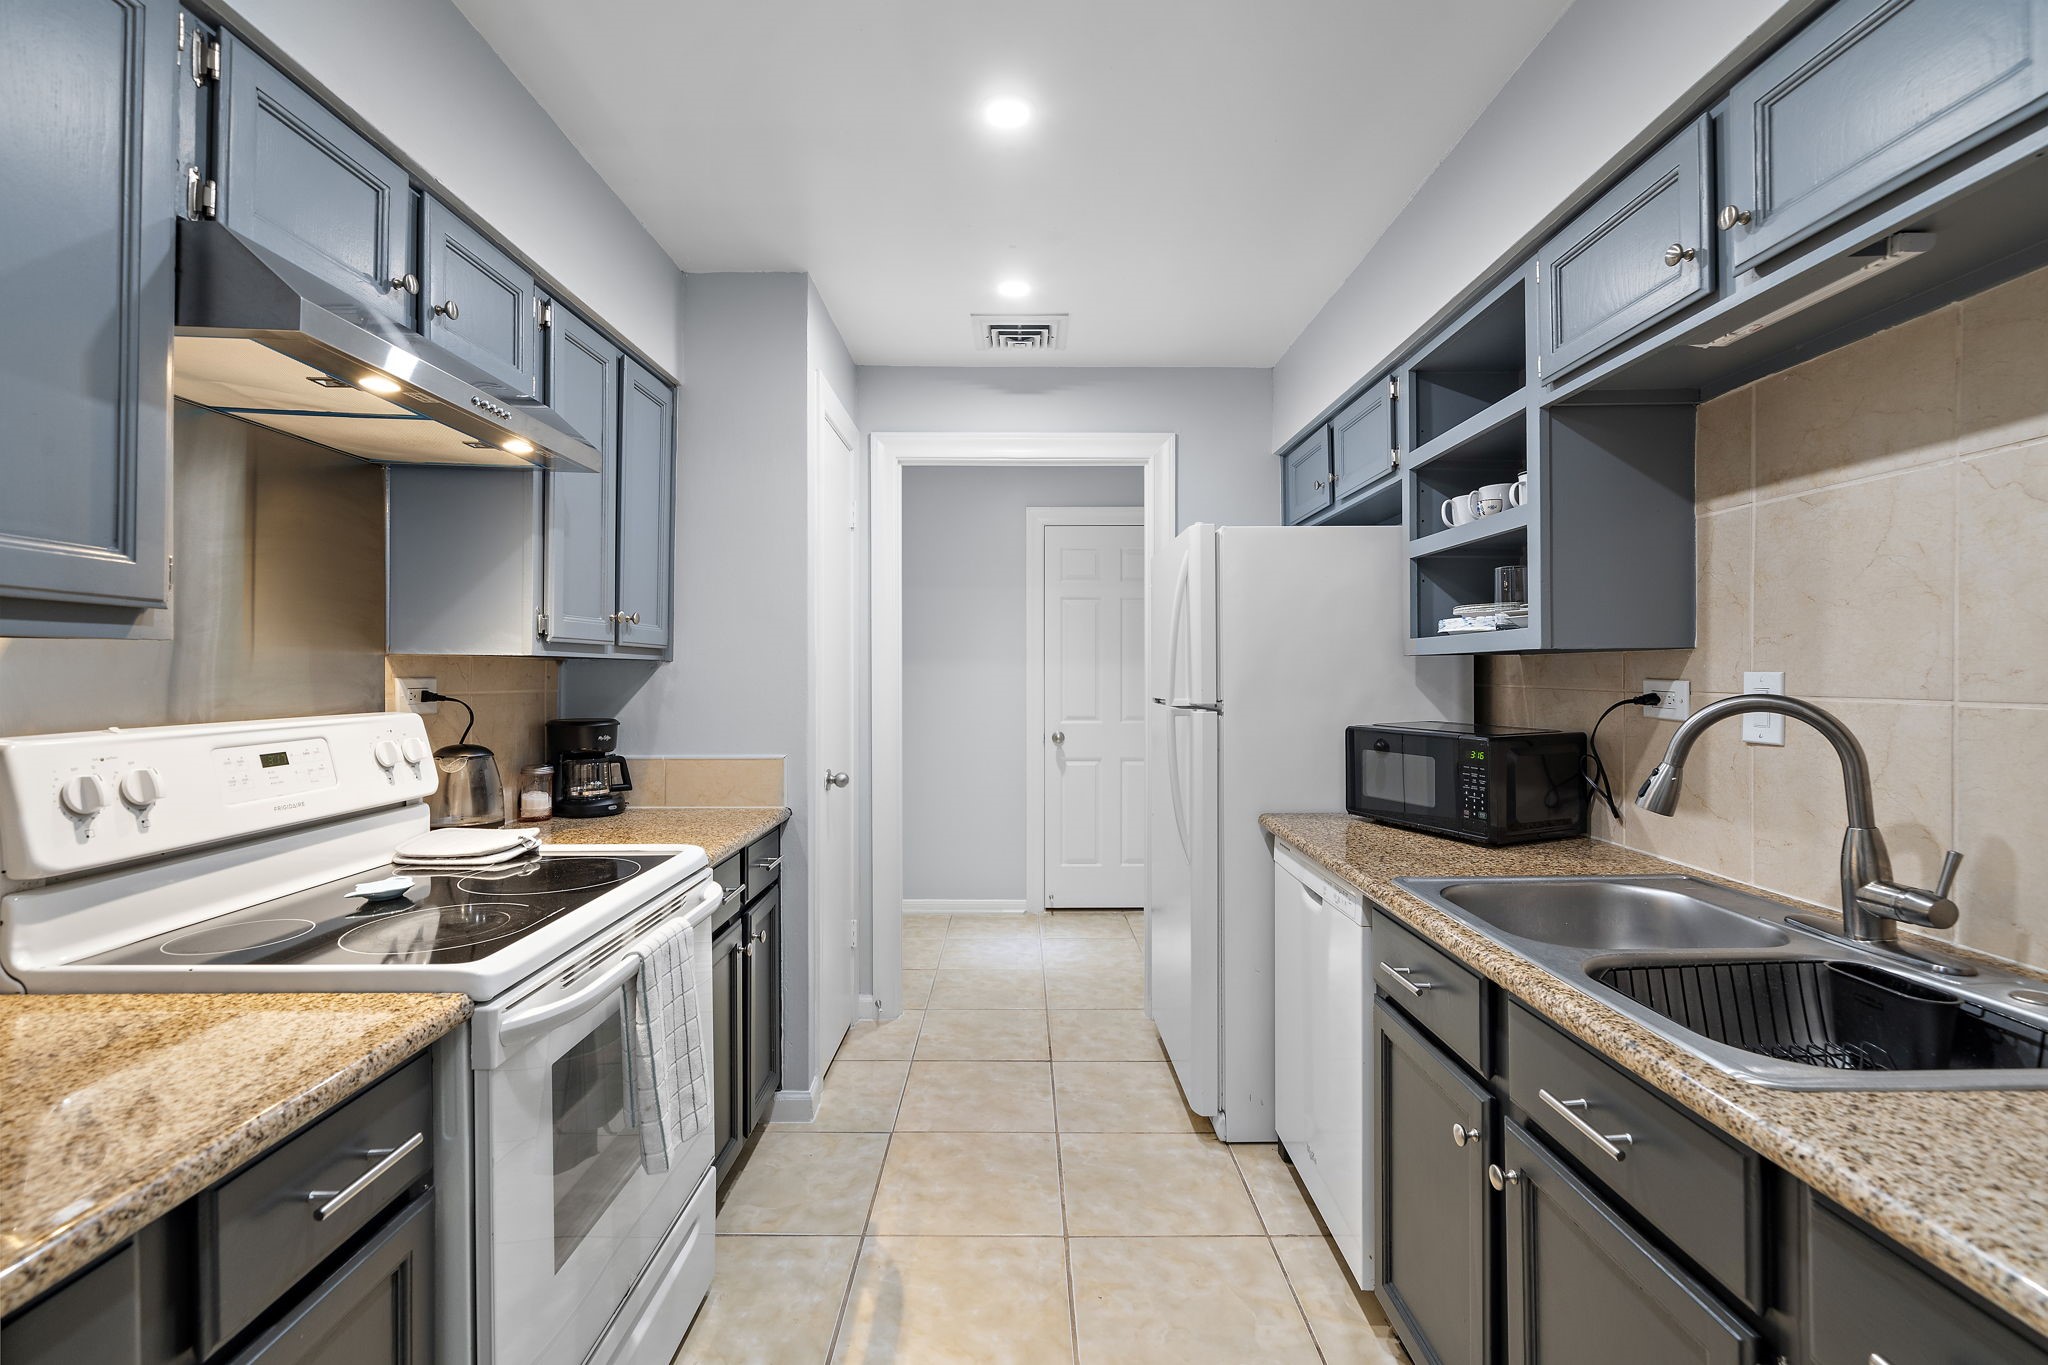 Galley kitchen with gray-blue cabinets, stone countertops, leading to a doorway.